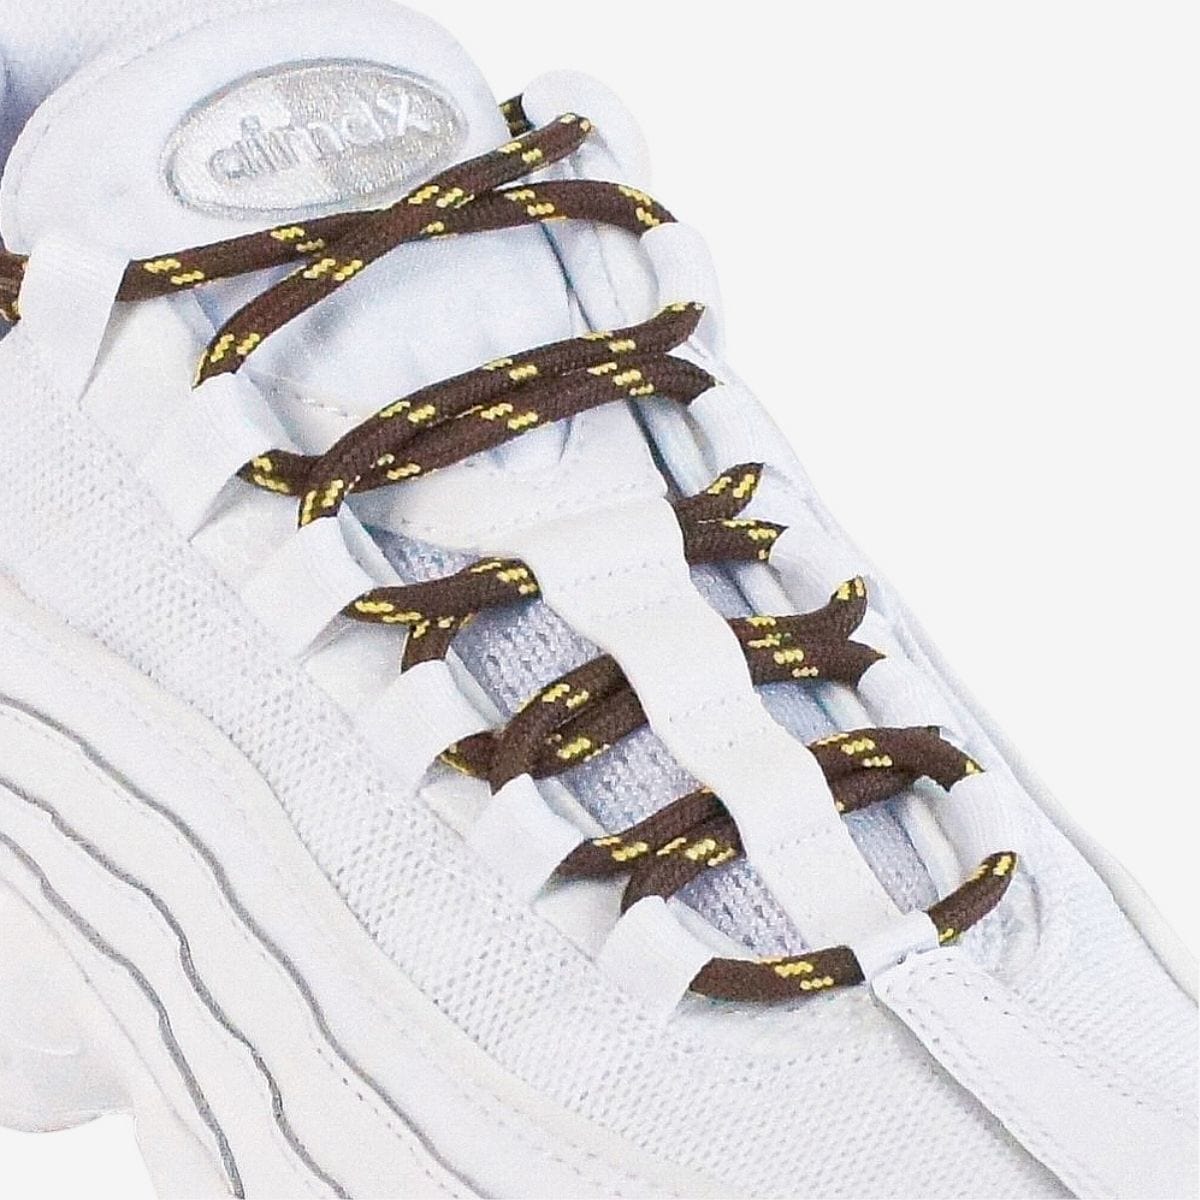 walking-shoe-laces-online-in-australia-colour-dark-brown-and-yellow